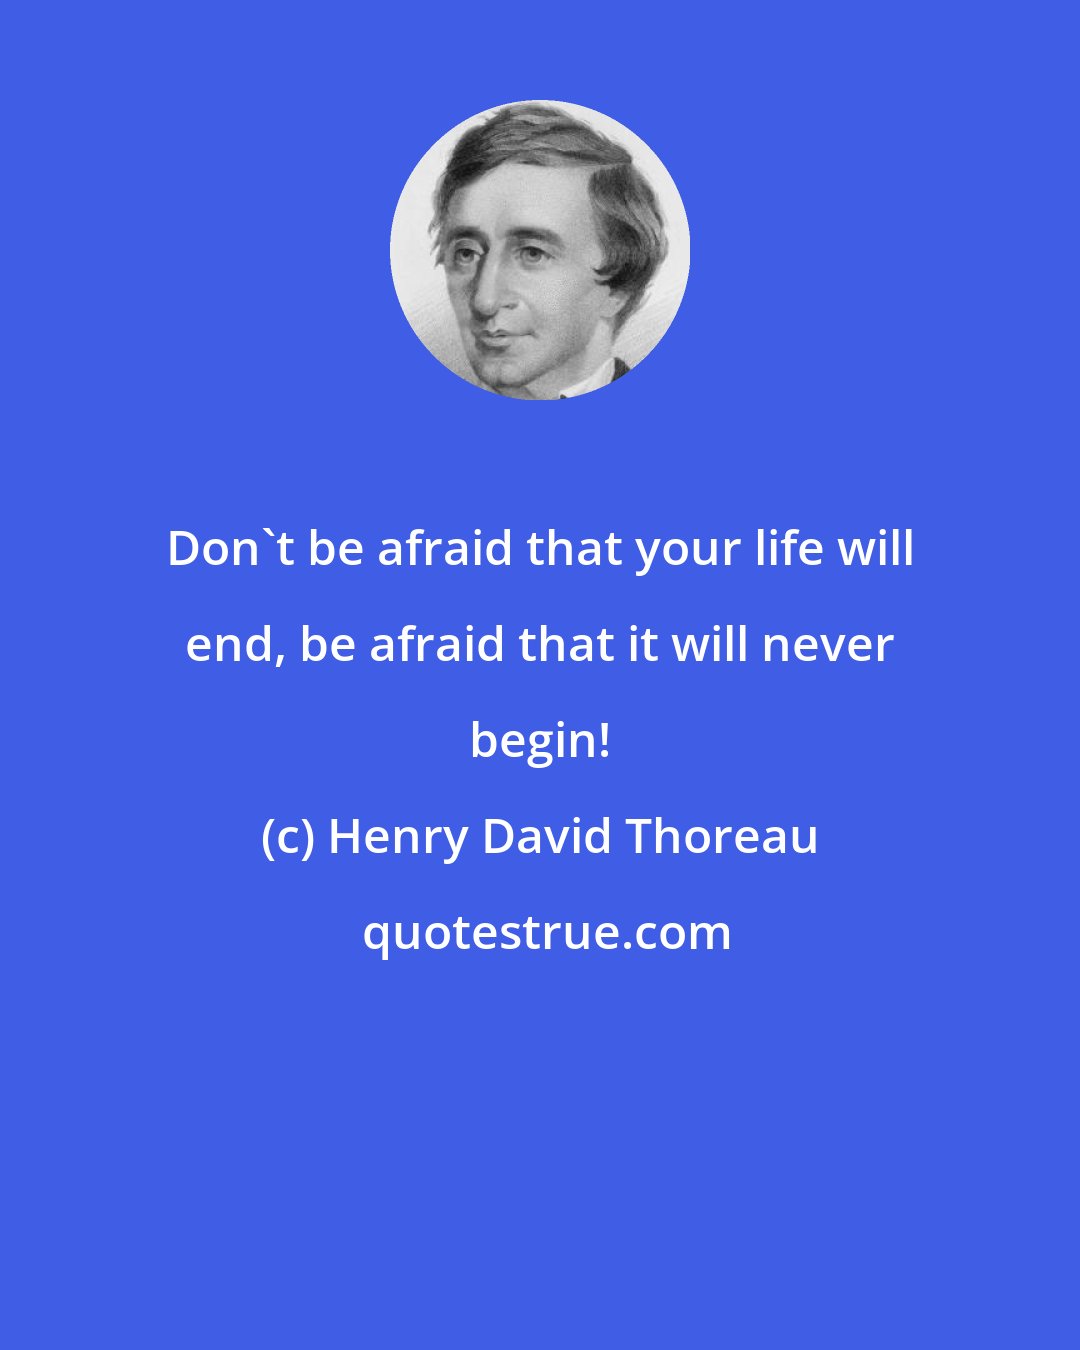 Henry David Thoreau: Don't be afraid that your life will end, be afraid that it will never begin!